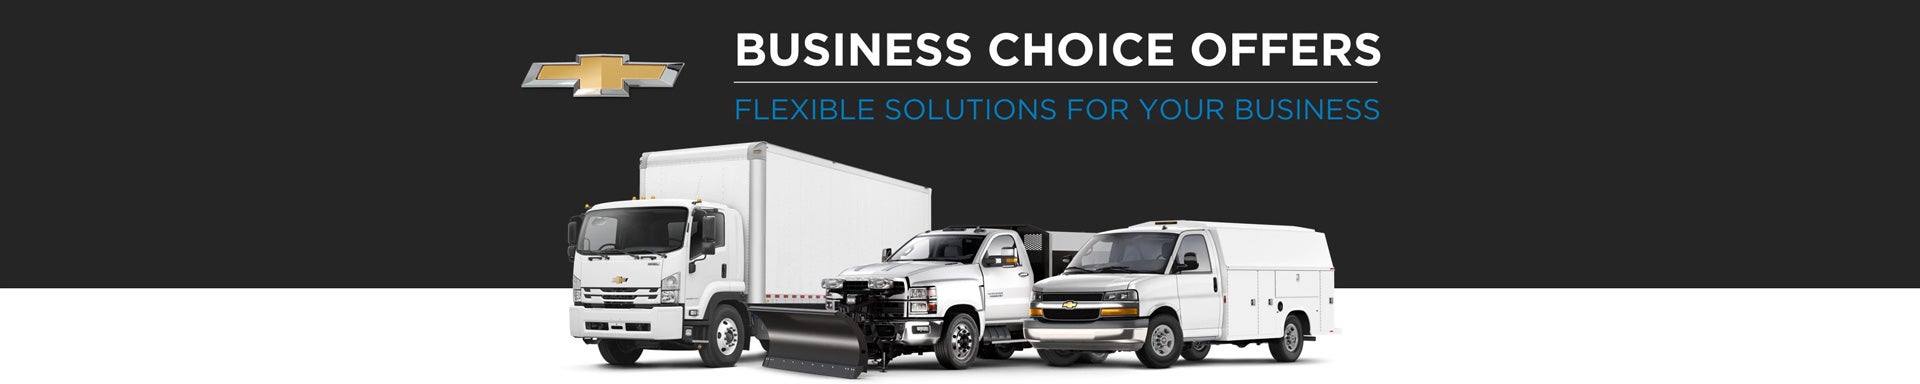 Chevrolet Business Choice Offers - Flexible Solutions for your Business - Earnhardt Chevrolet in Chandler AZ